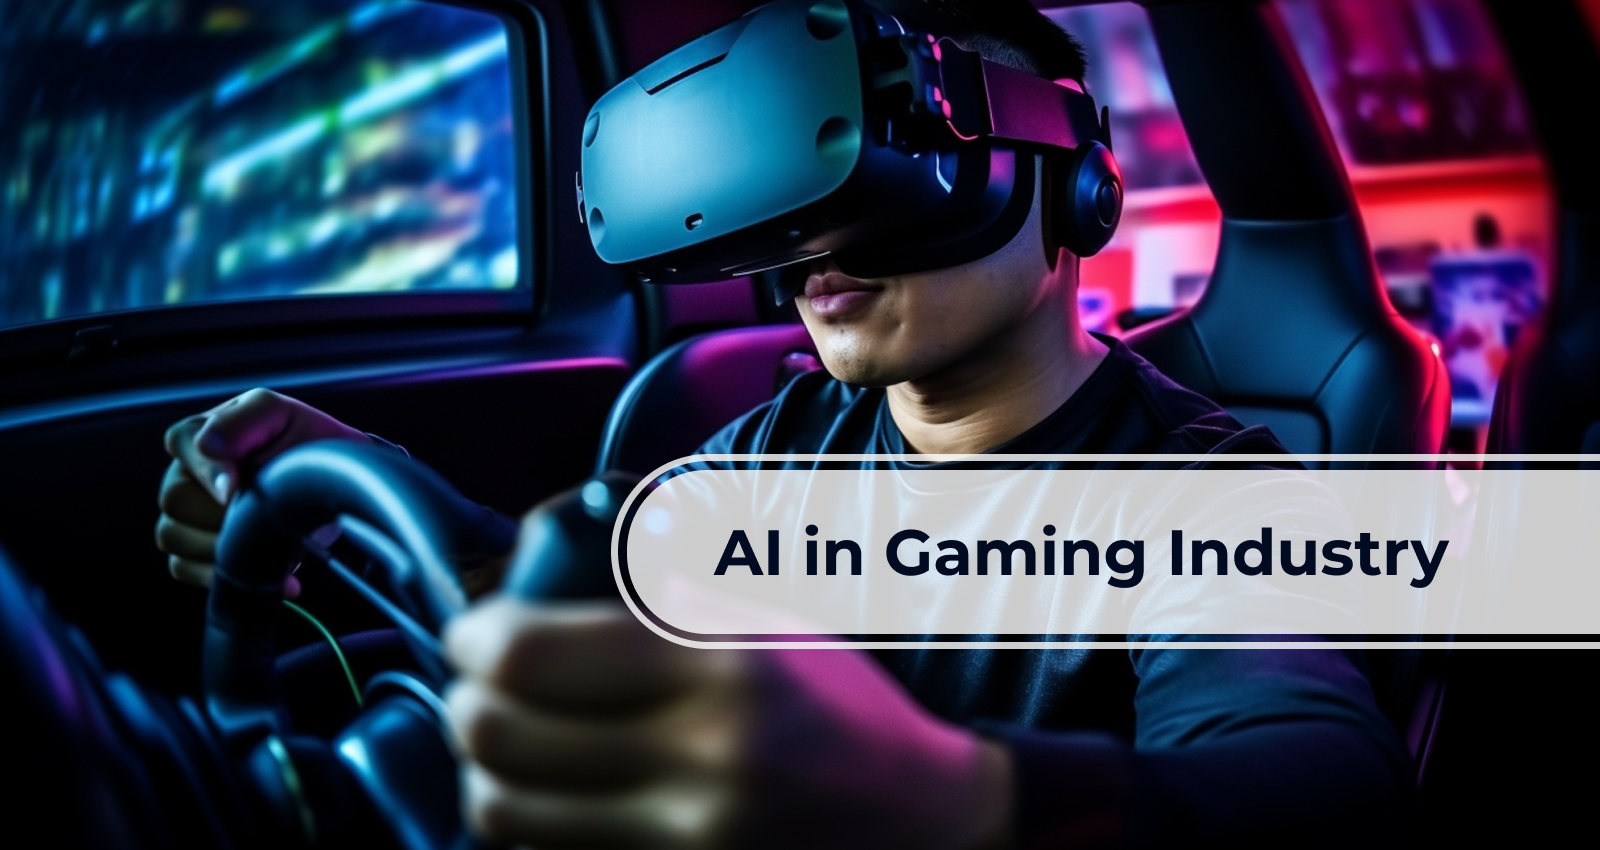 Artificial Intelligence, AI, AI in Gaming Industry, AI in Games, Artificial Intelligence Games, AI Games, Virtual Reality Games, VR Games, Augmented Reality, AR Games, VR & AR Games